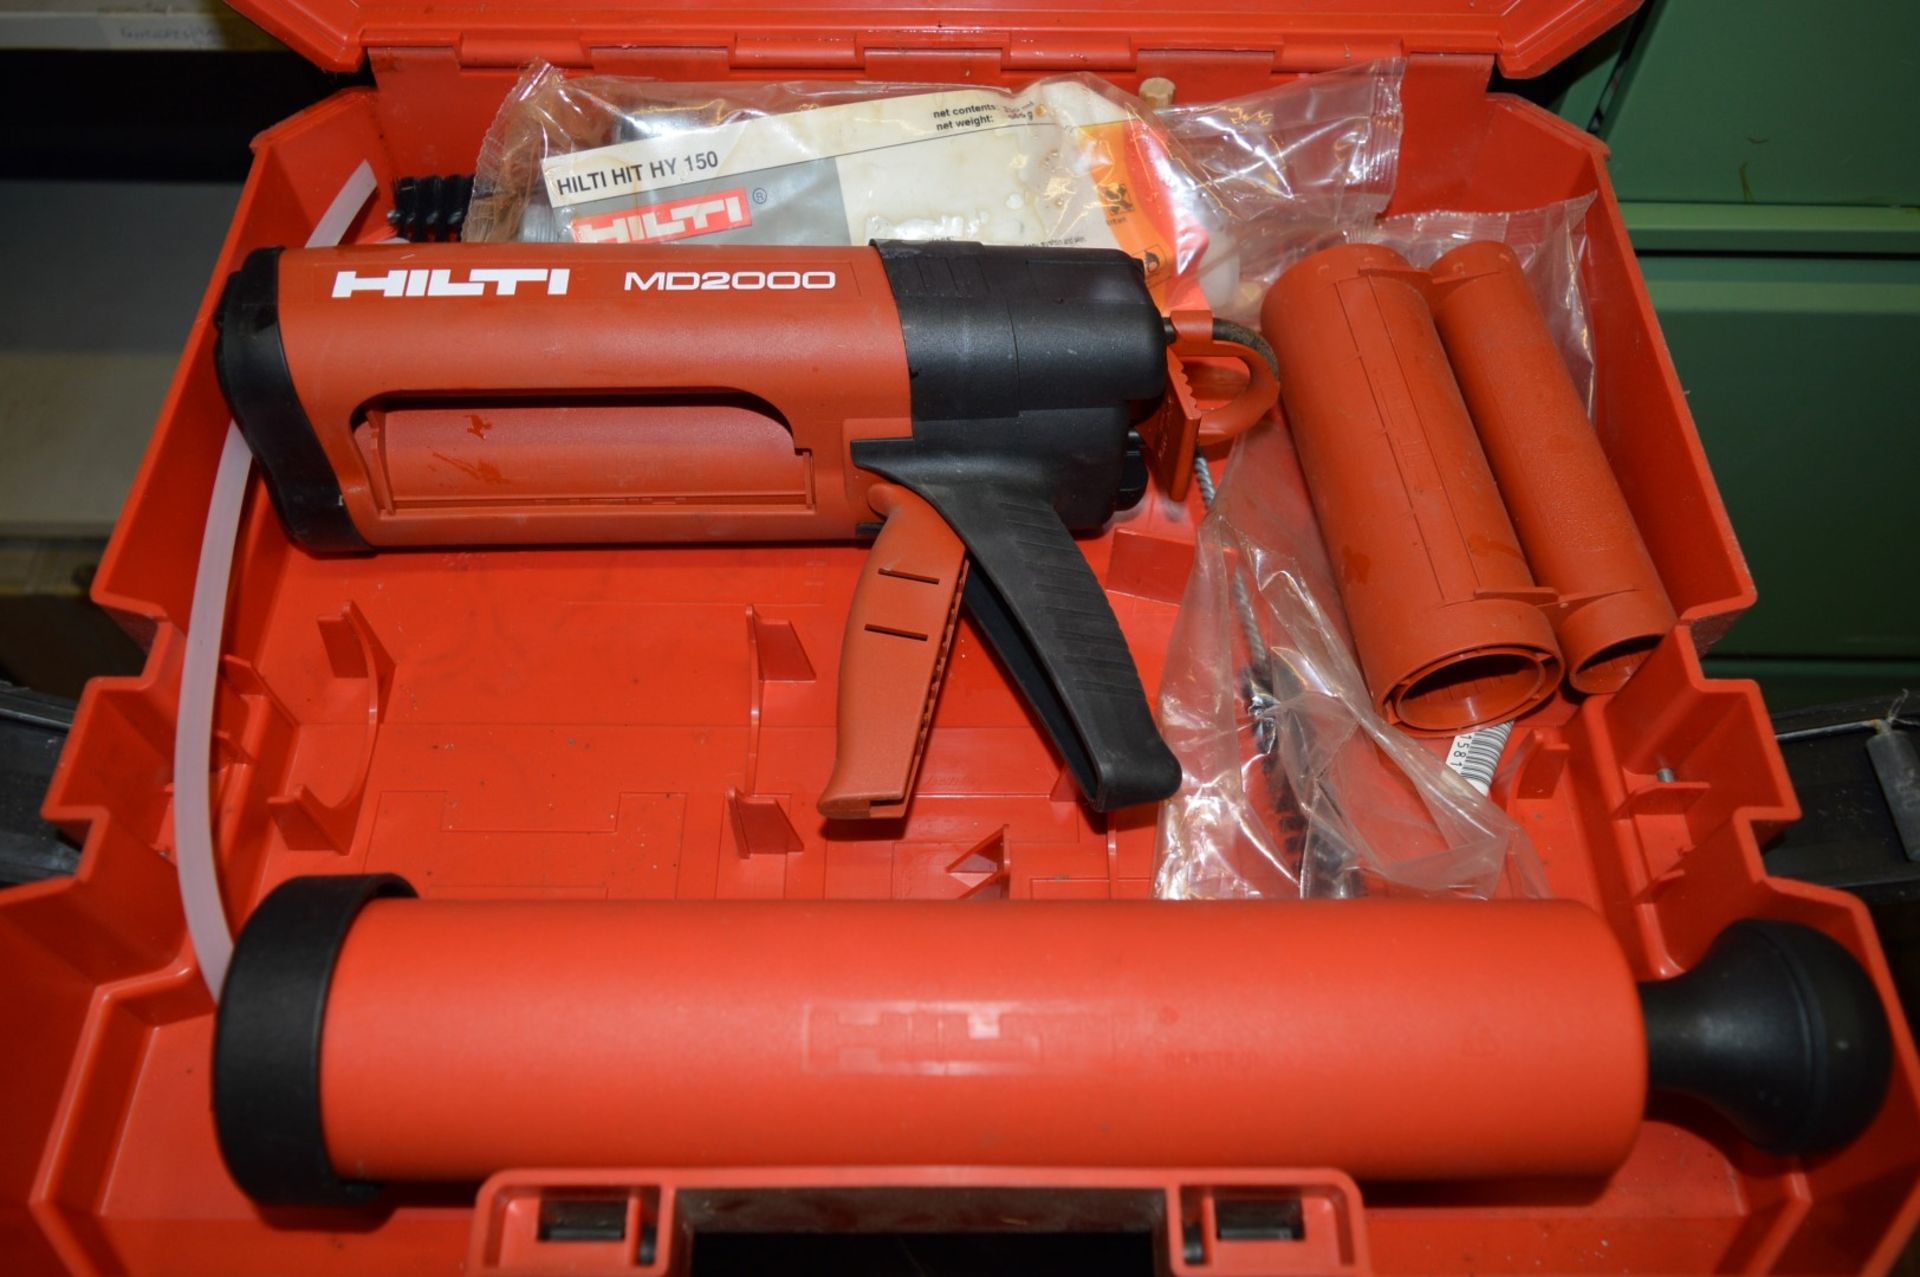 1 x Hilti MD2000 Manual HIT Adhesive Dispenser With Case, Accessories and HIT-HY 150 Pack - Ref: